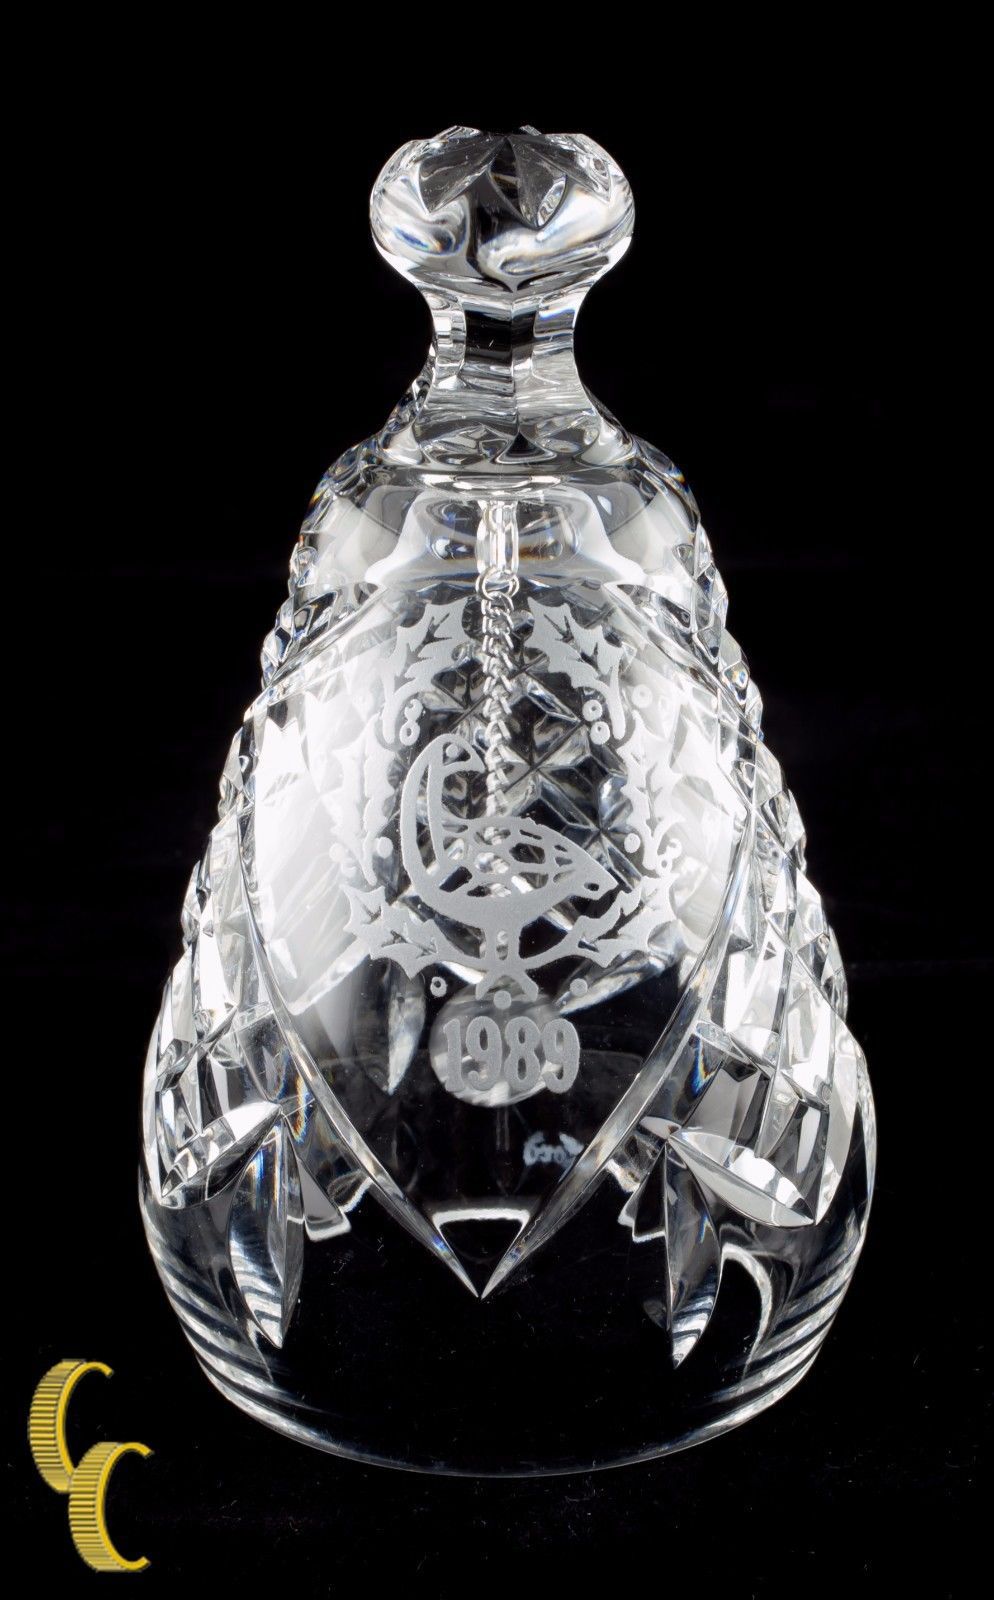 1989 Waterford Crystal Christmas Bell "Six Geese a-Laying" Great Condition! - $62.37